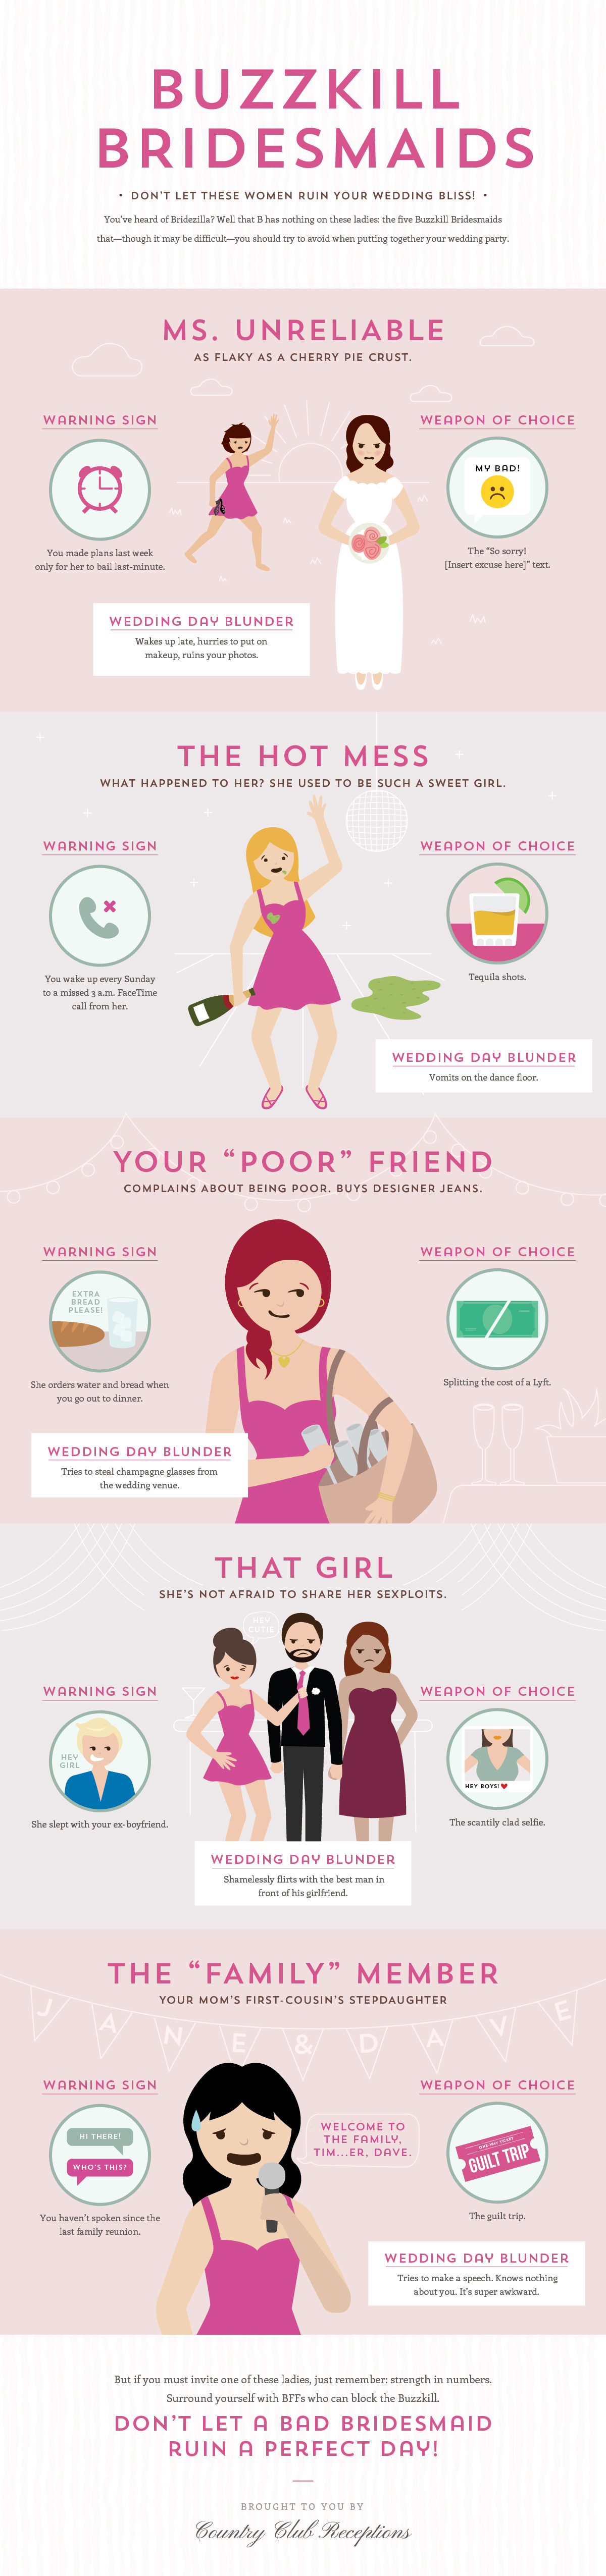 Avoid Picking These 5 Buzzkill Bridesmaids for Your Bridal Party (INFOGRAPHIC)